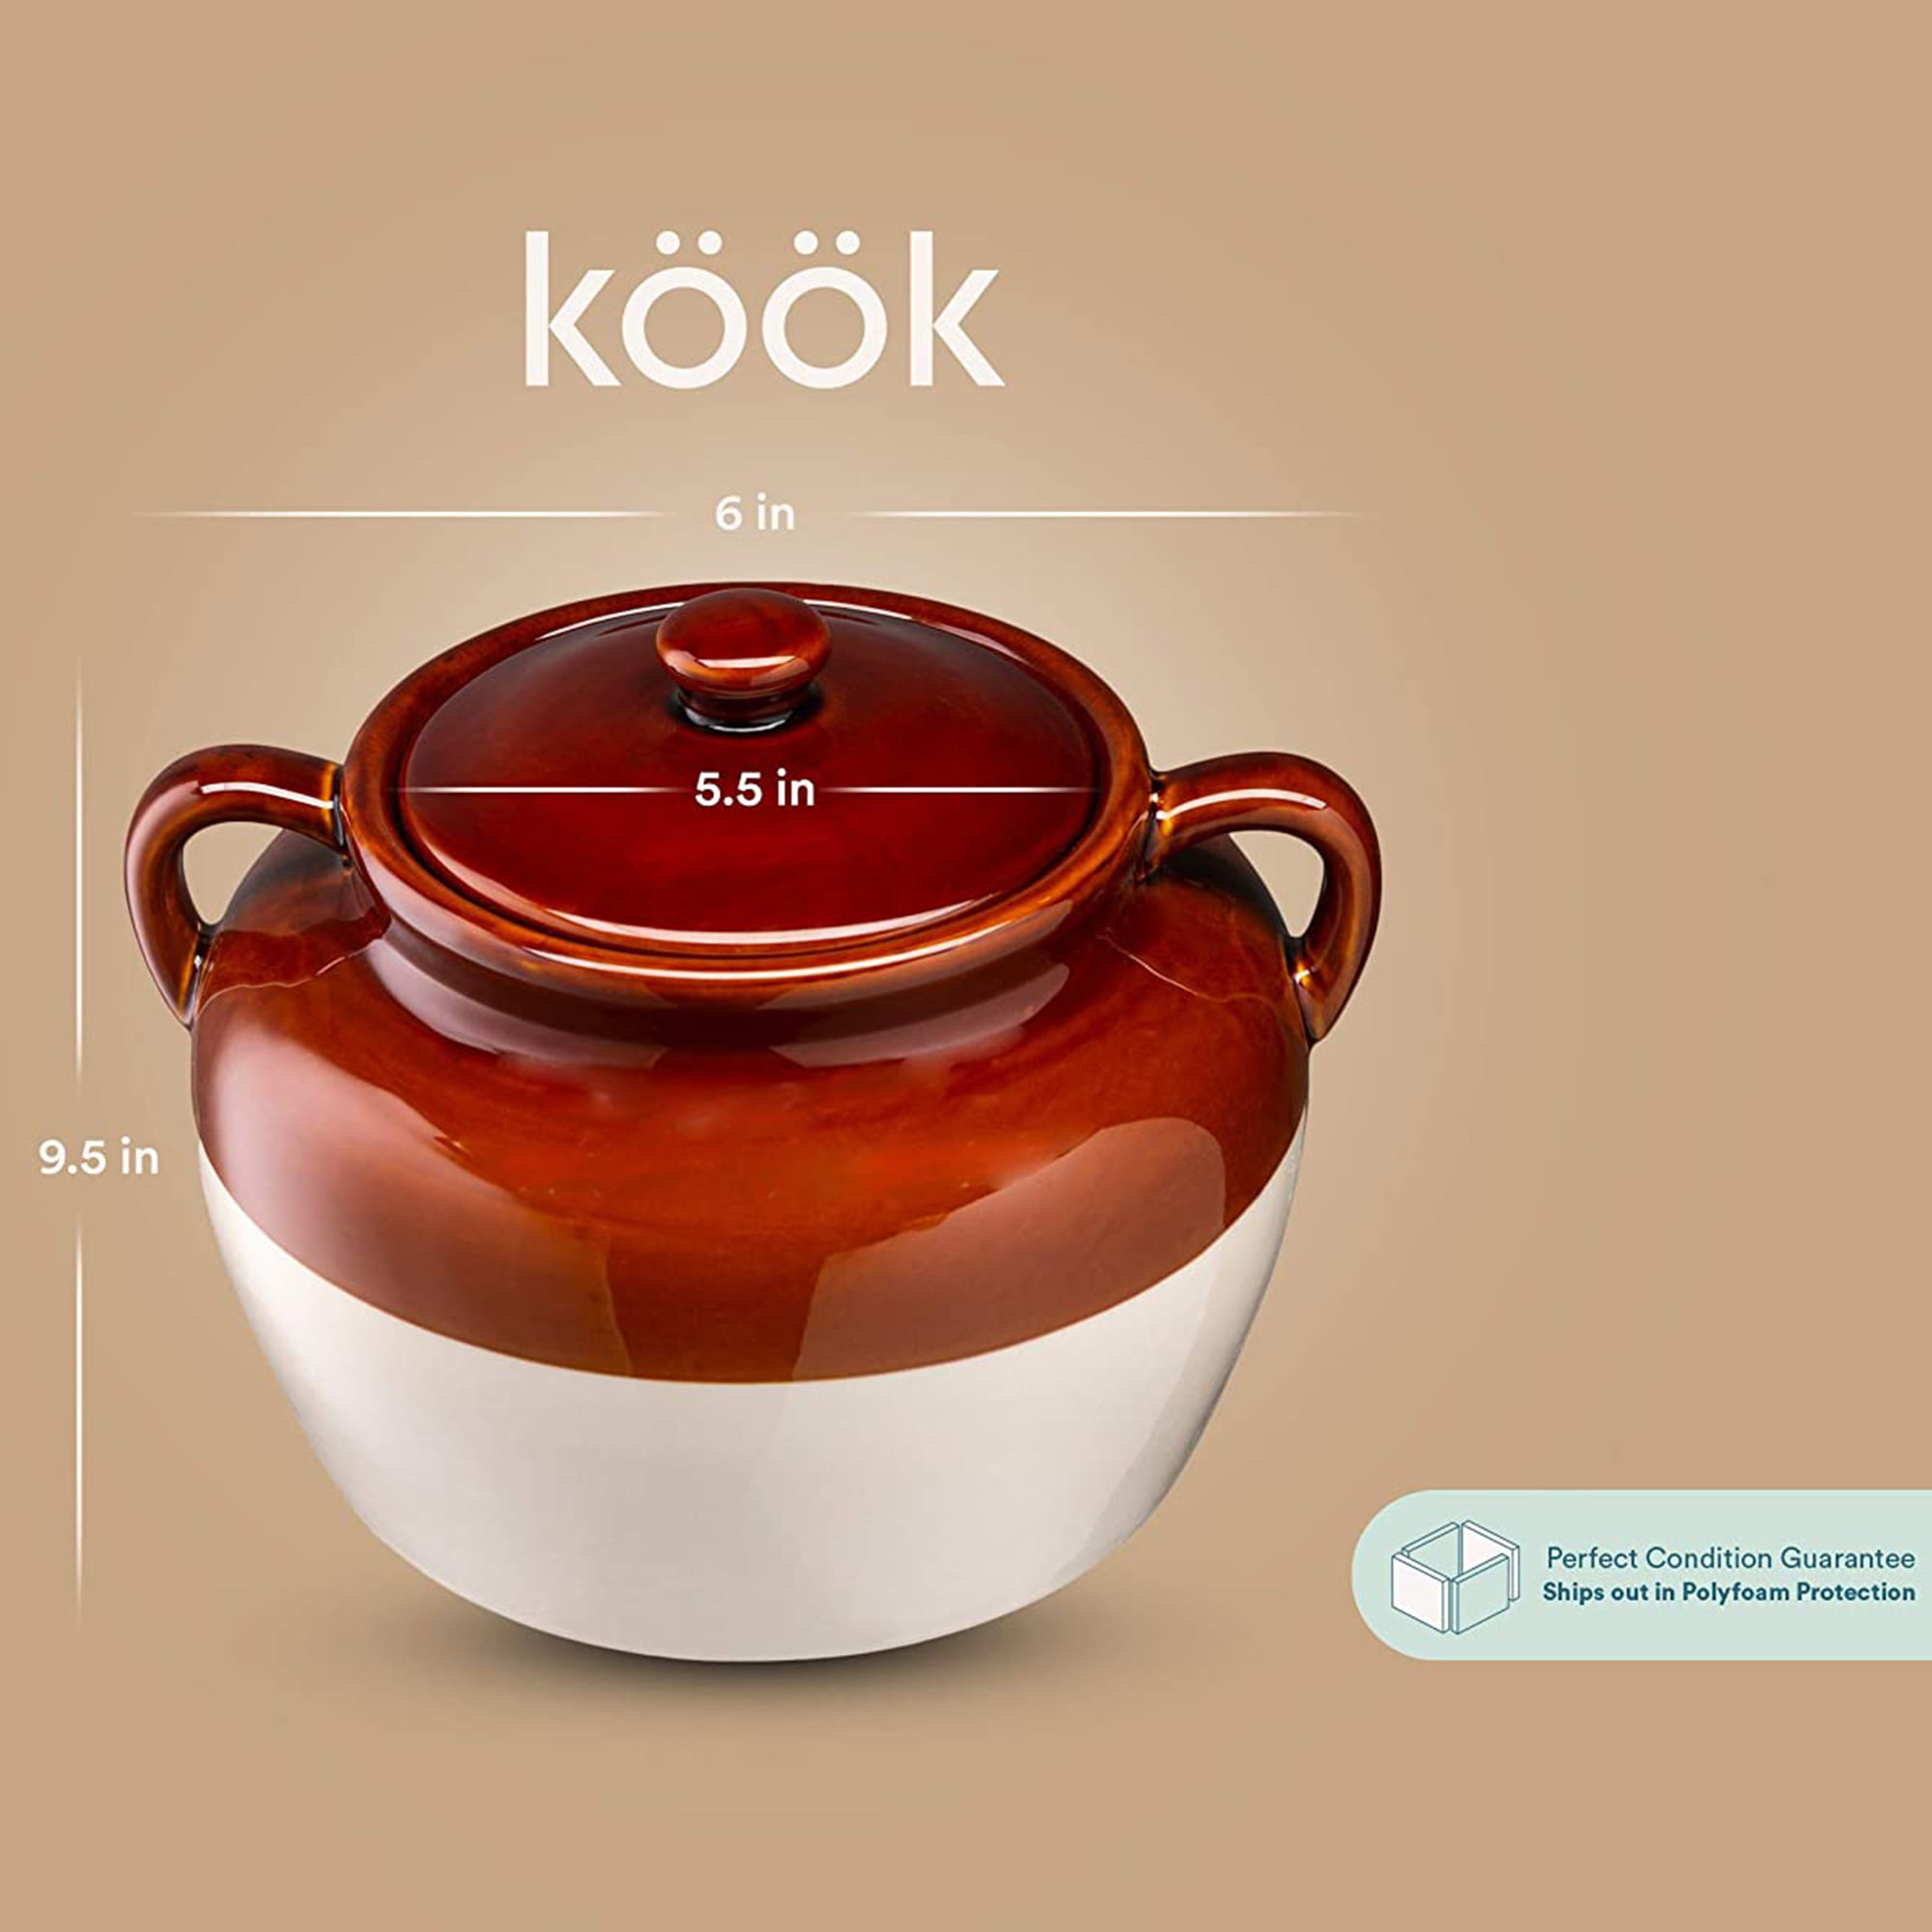 Kook Ceramic Bean Pot, Hand Painted, with Lid and Handles